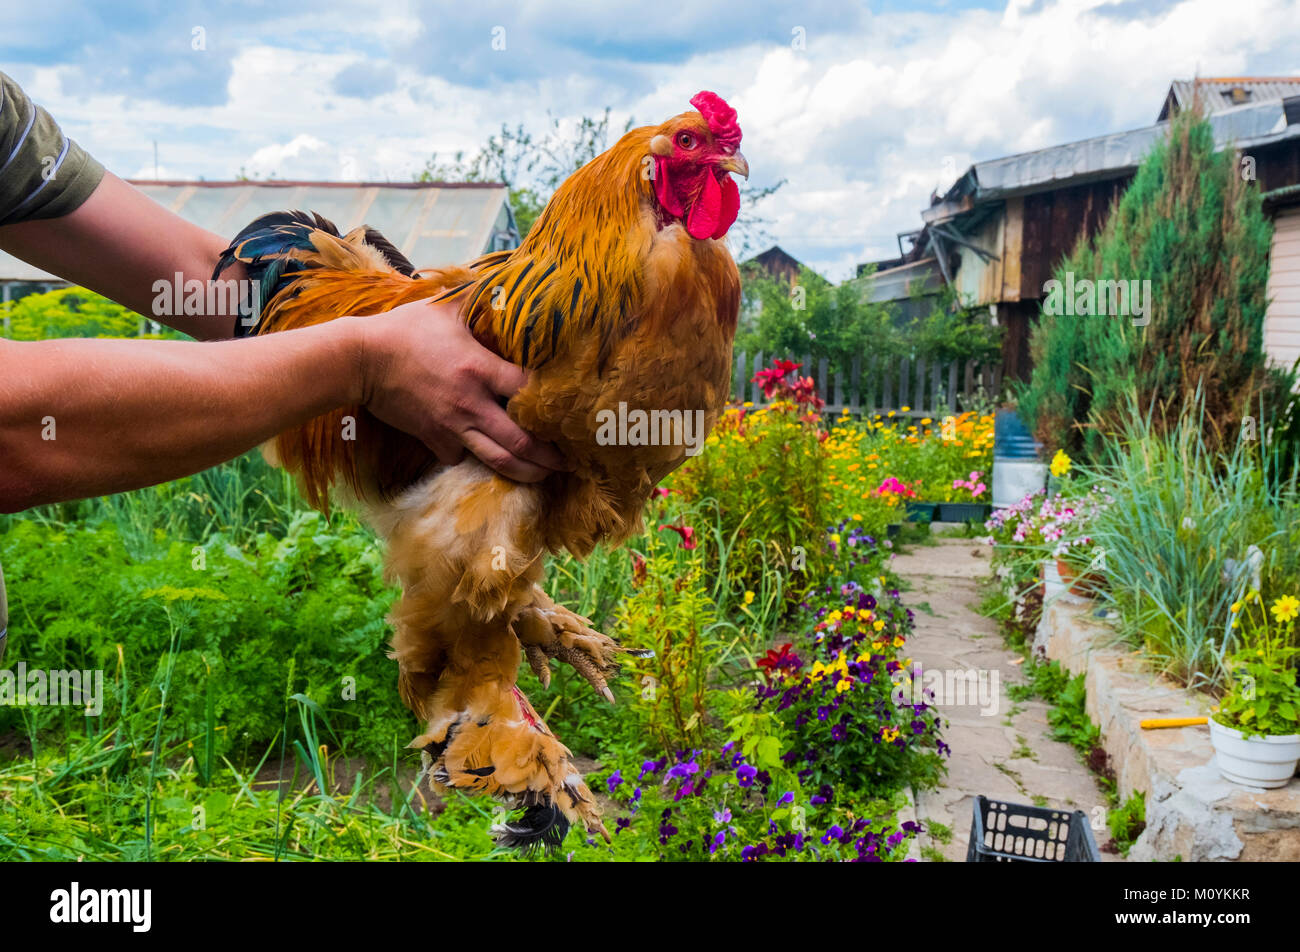 Close up of man holding rooster on farm Stock Photo